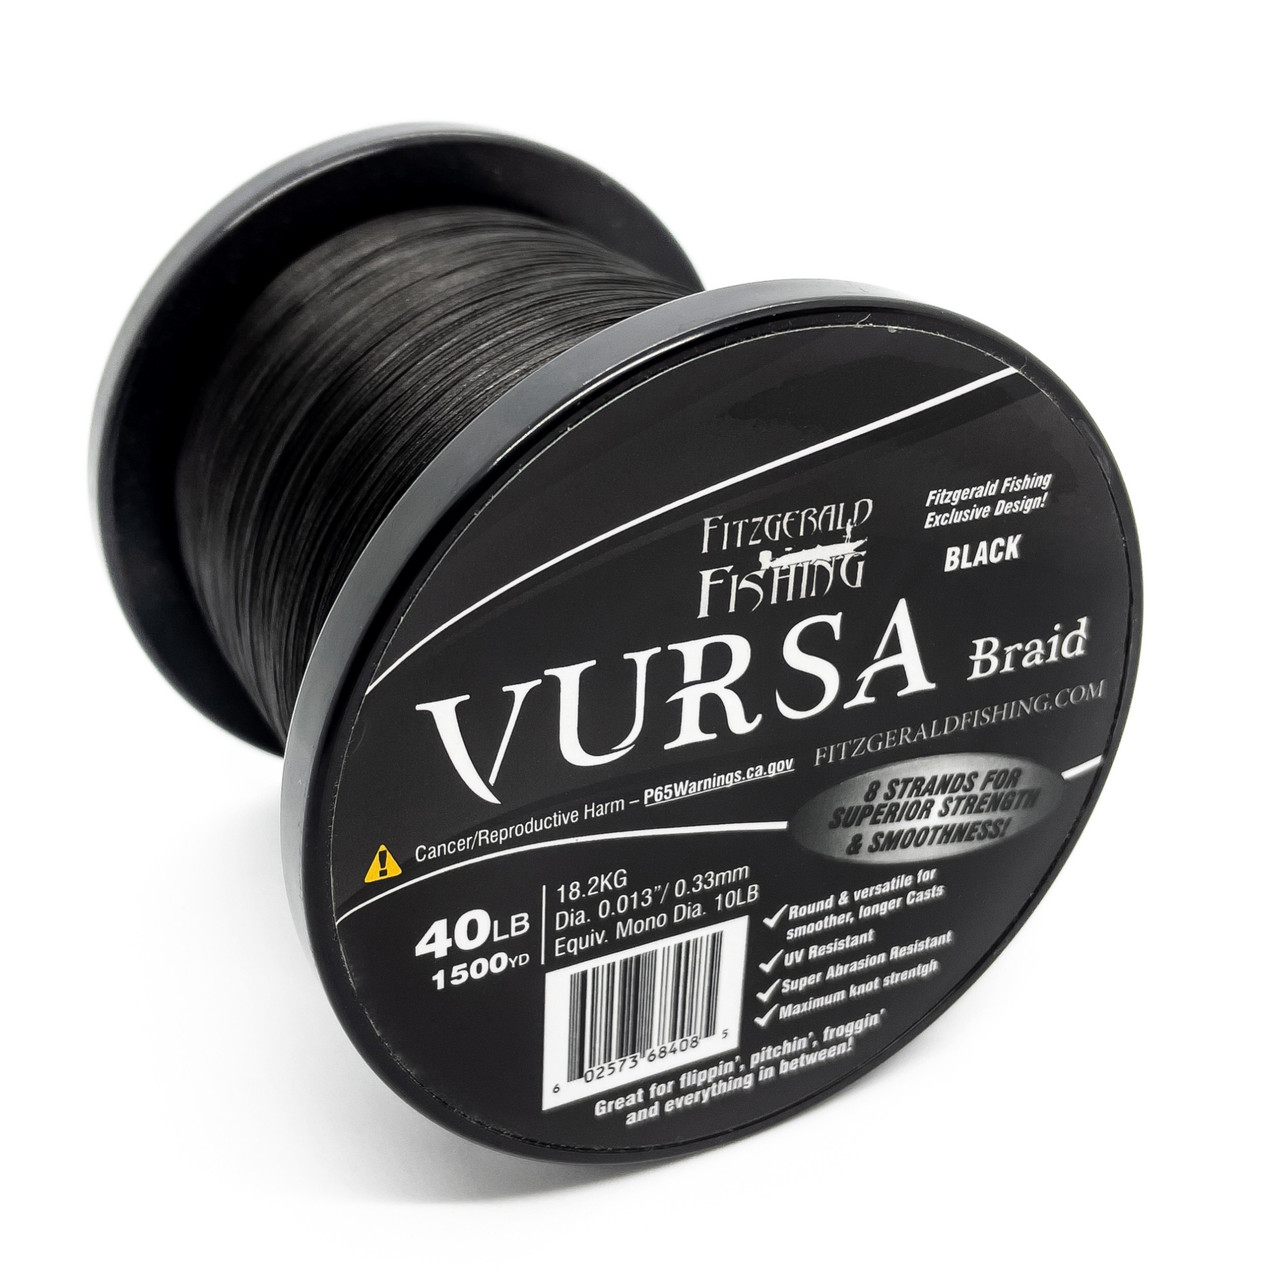 Top 5 Best Braided Fishing Lines of 2024, Reviews